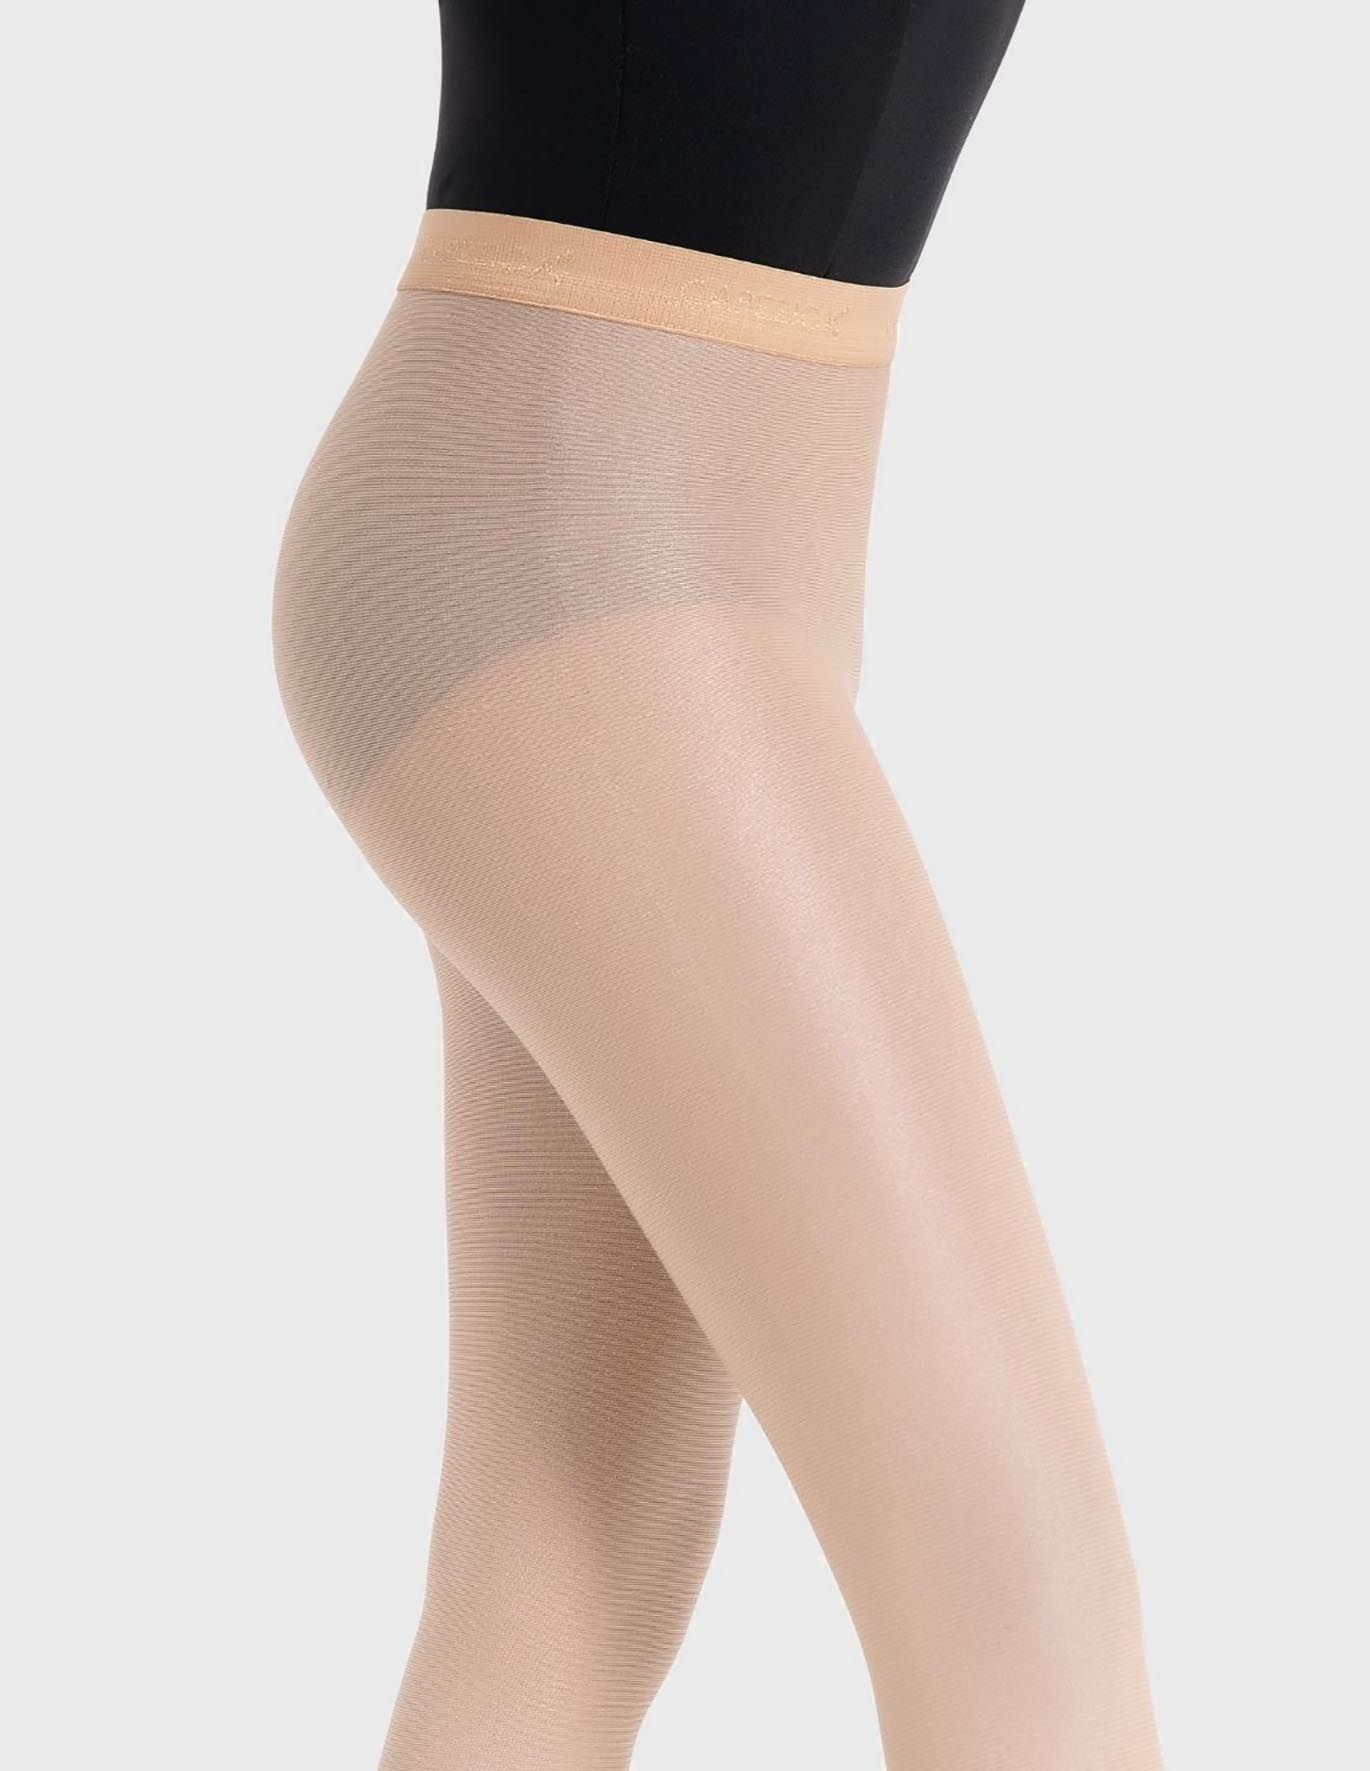 1808 Capezio Ultra Shimmer Tights - Black and Pink Dance Supplies